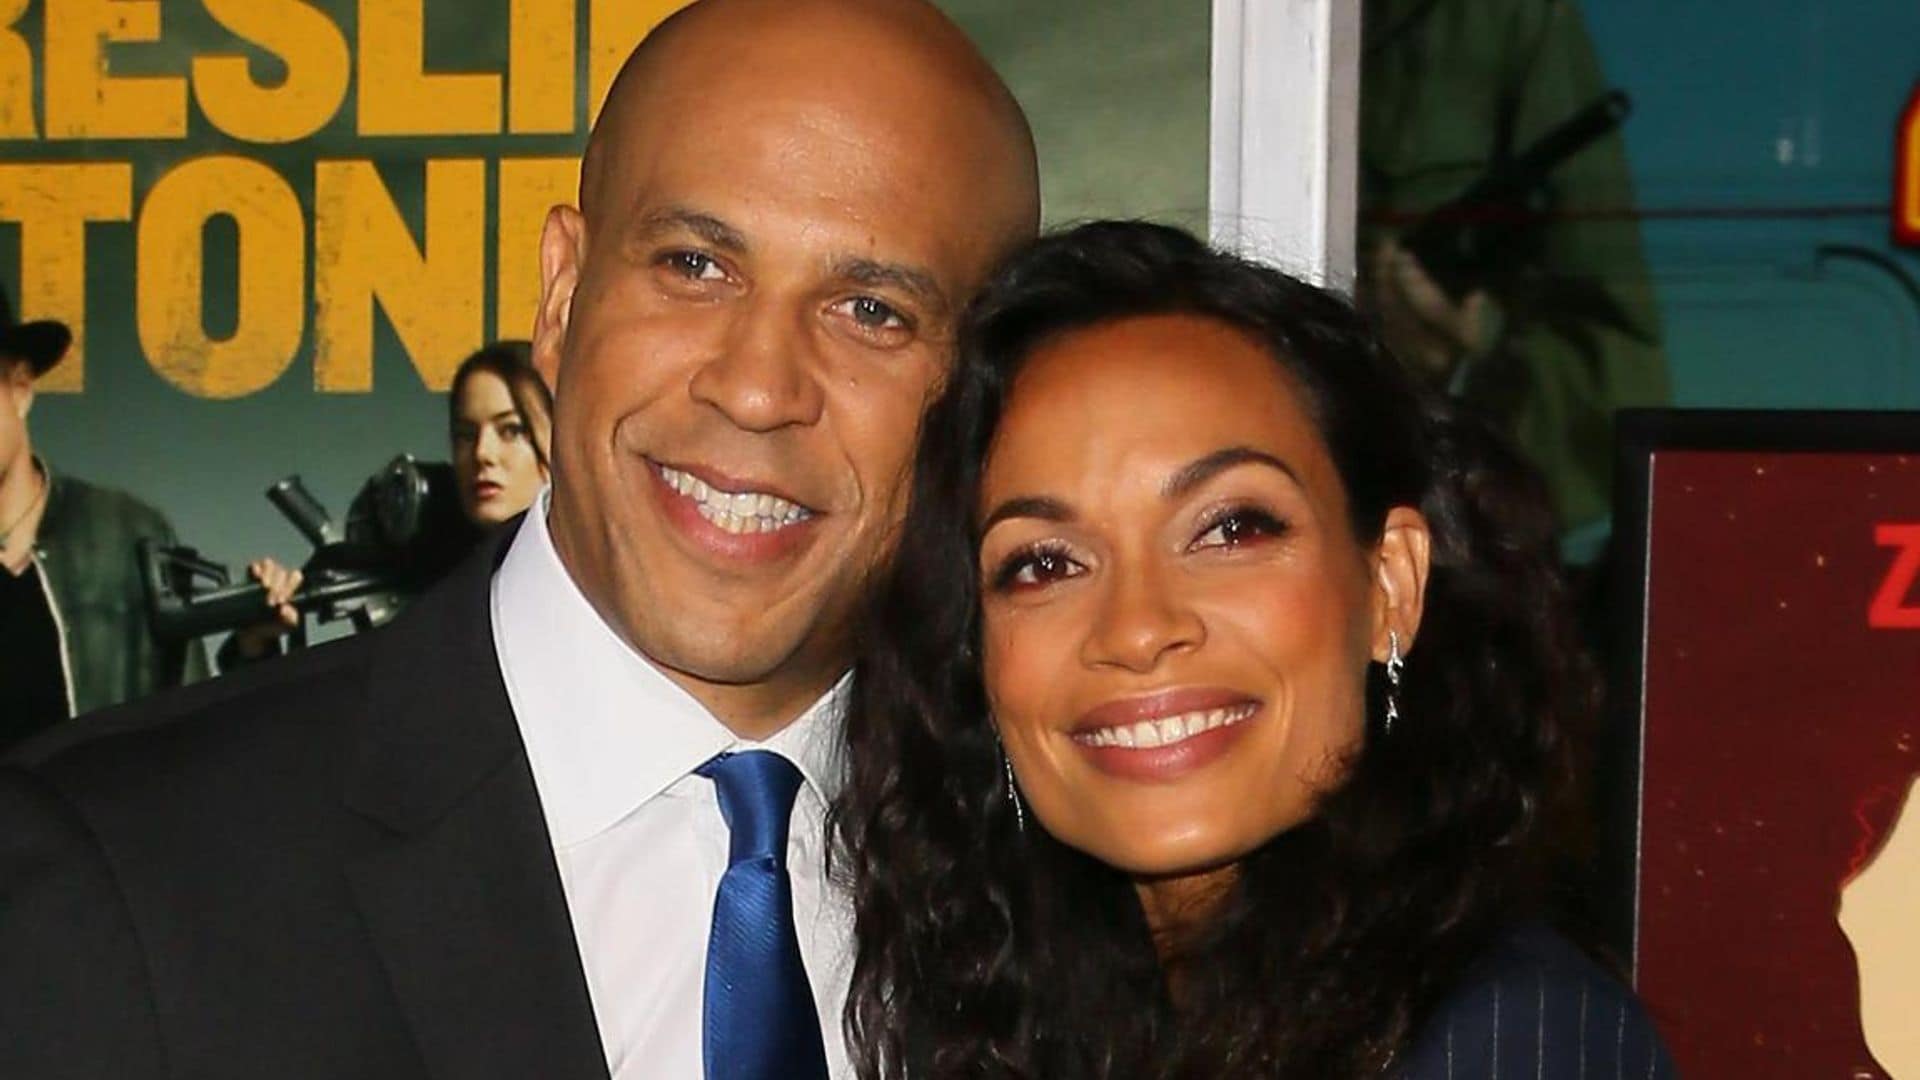 Rosario Dawson is moving to New Jersey to be closer to her boyfriend Cory Booker